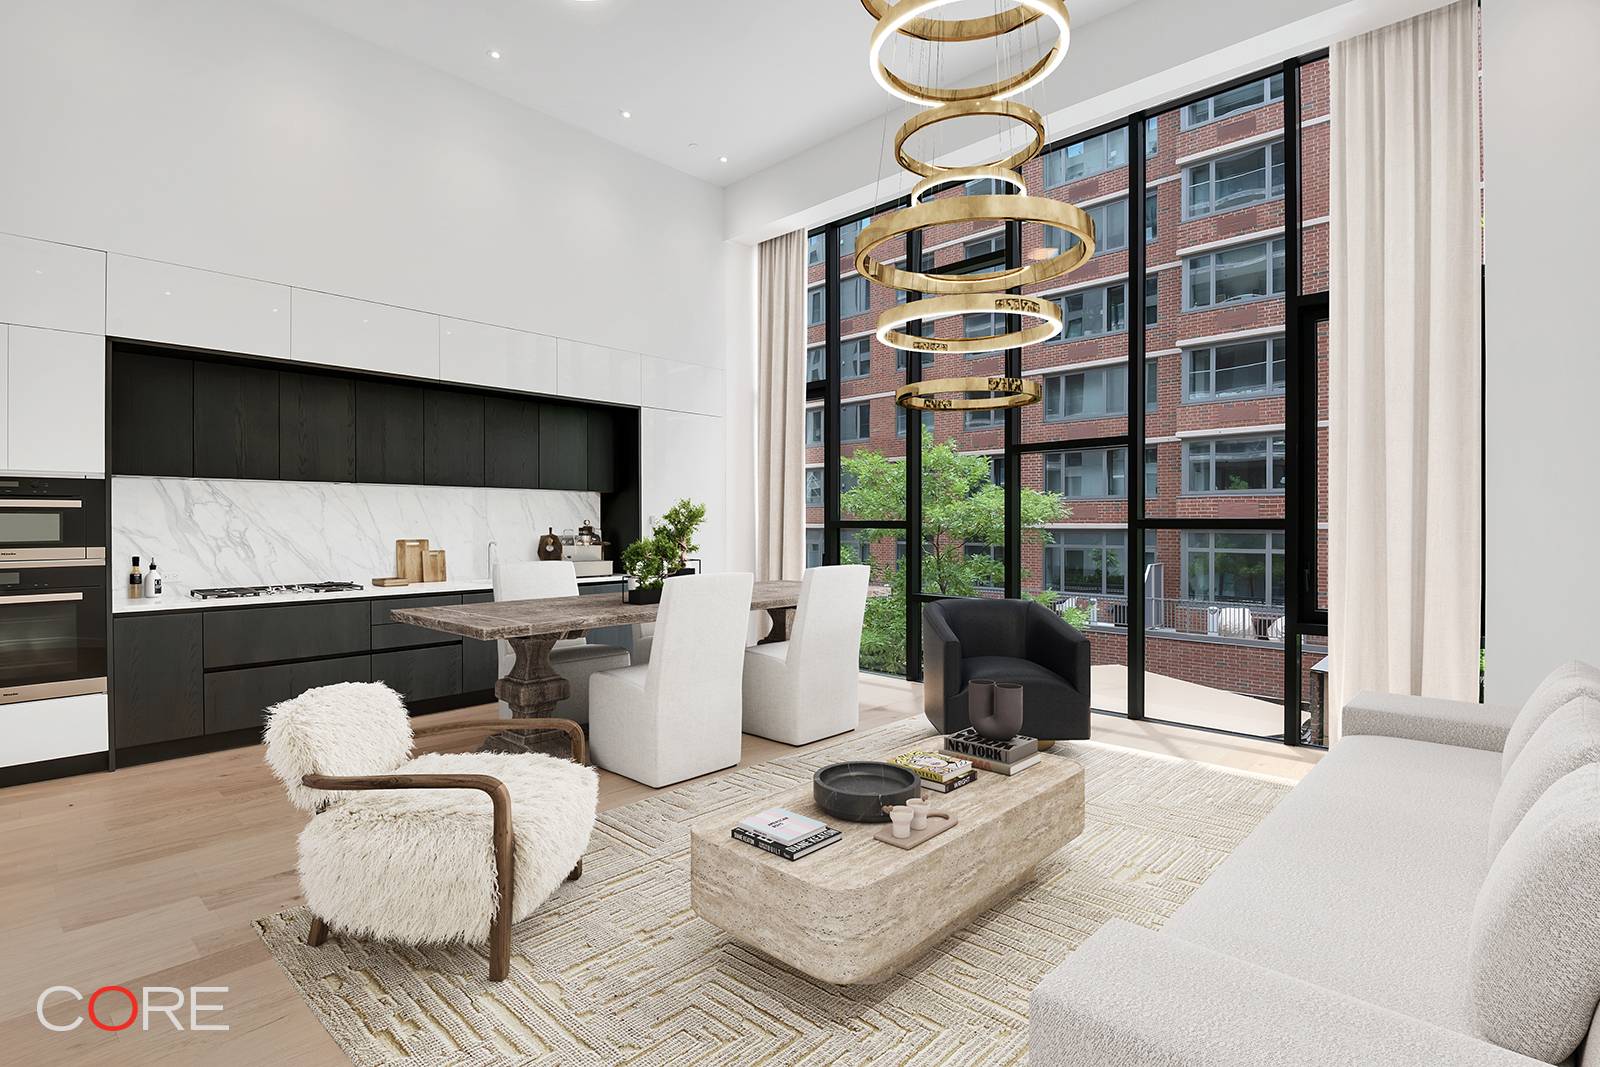 Introducing 534 West 29th, an intimate collection of six homes perfectly positioned in West Chelsea between the High Line, Hudson River Park, and Hudson Yards.